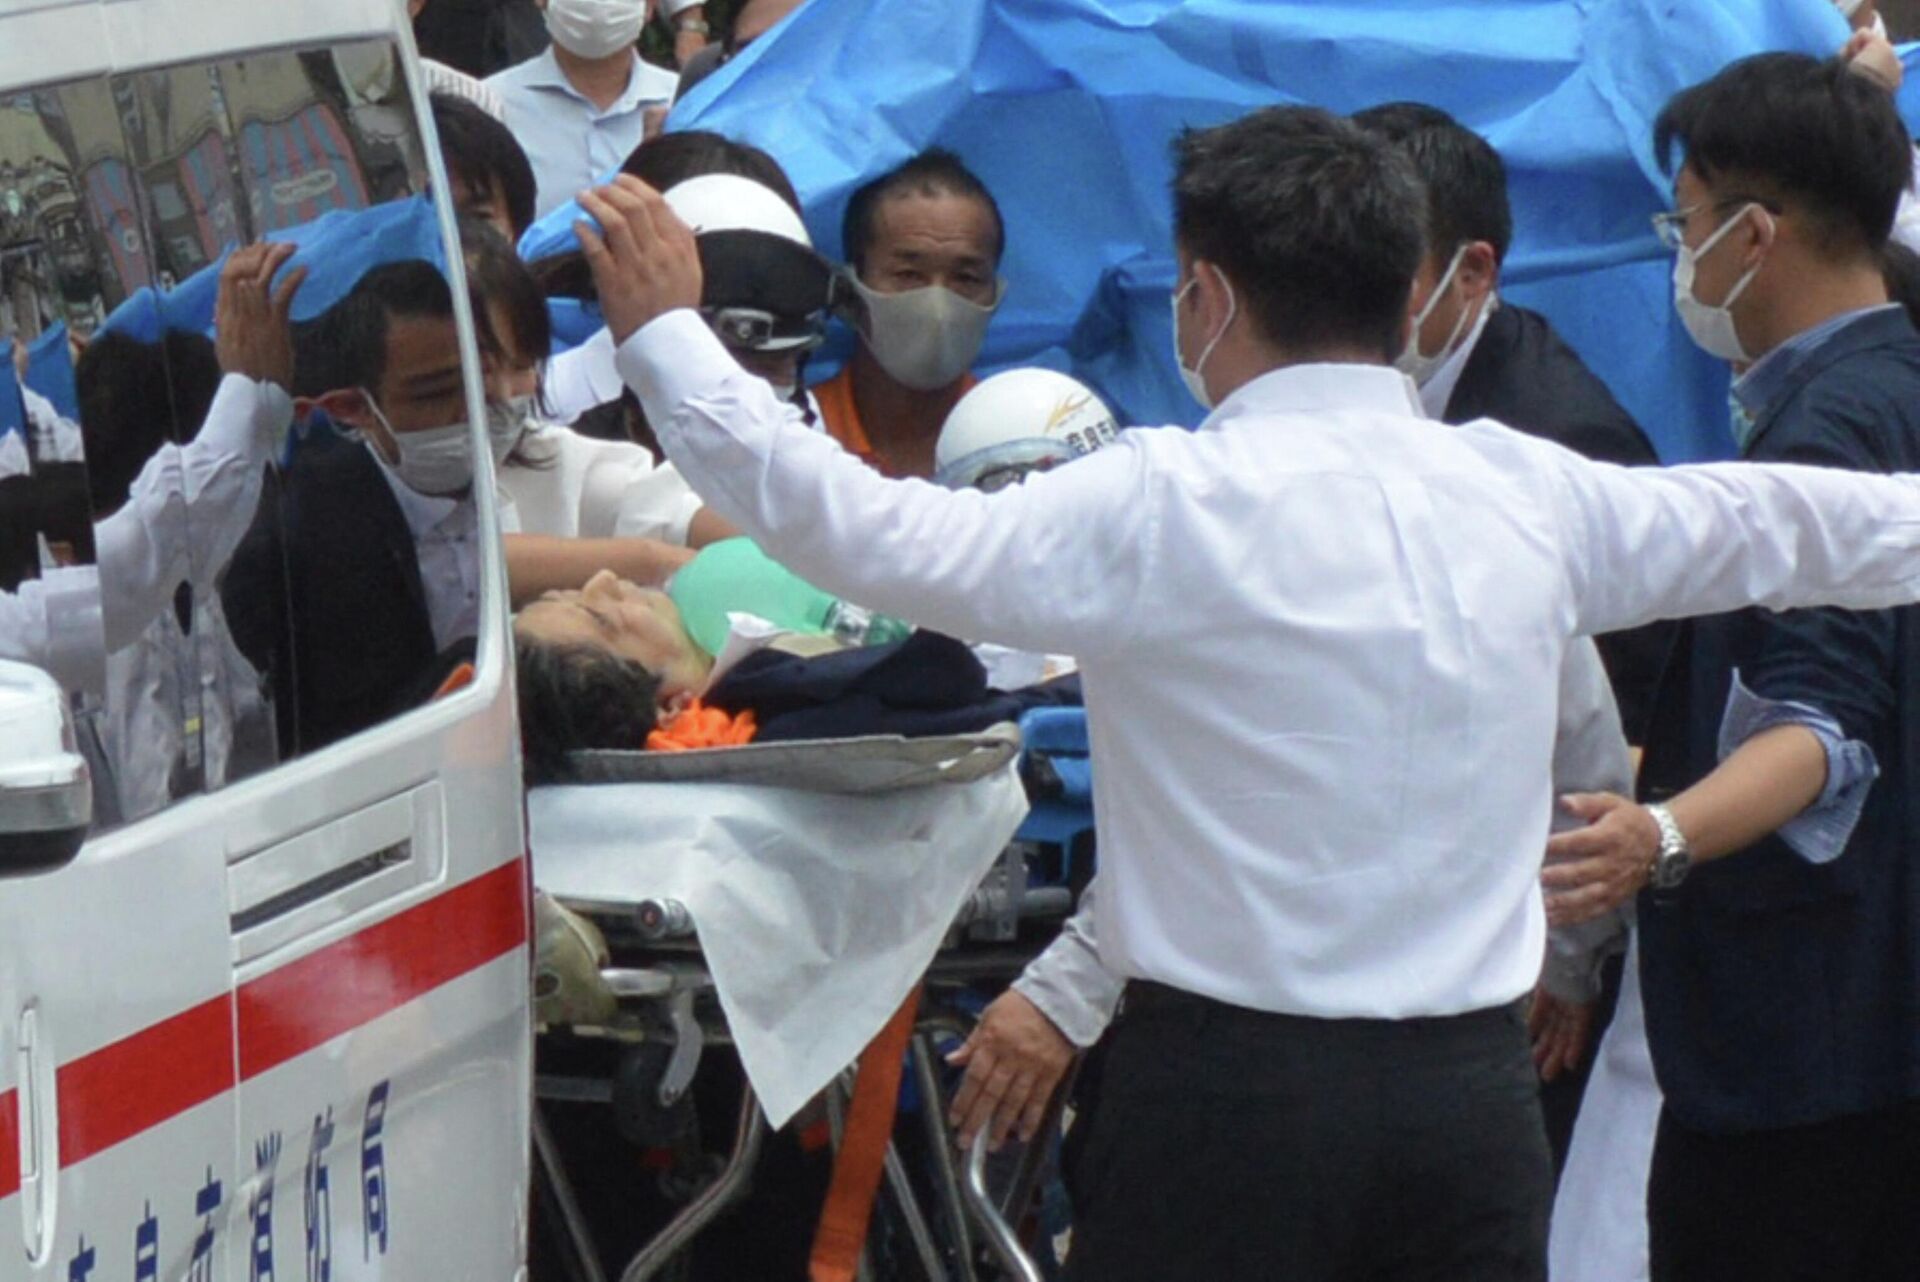 Former Japanese prime minister Shinzo Abe (C) is transported into an ambulance near Yamato Saidaiji Station after being shot in the city of Nara on July 8, 2022 - Sputnik International, 1920, 10.07.2022